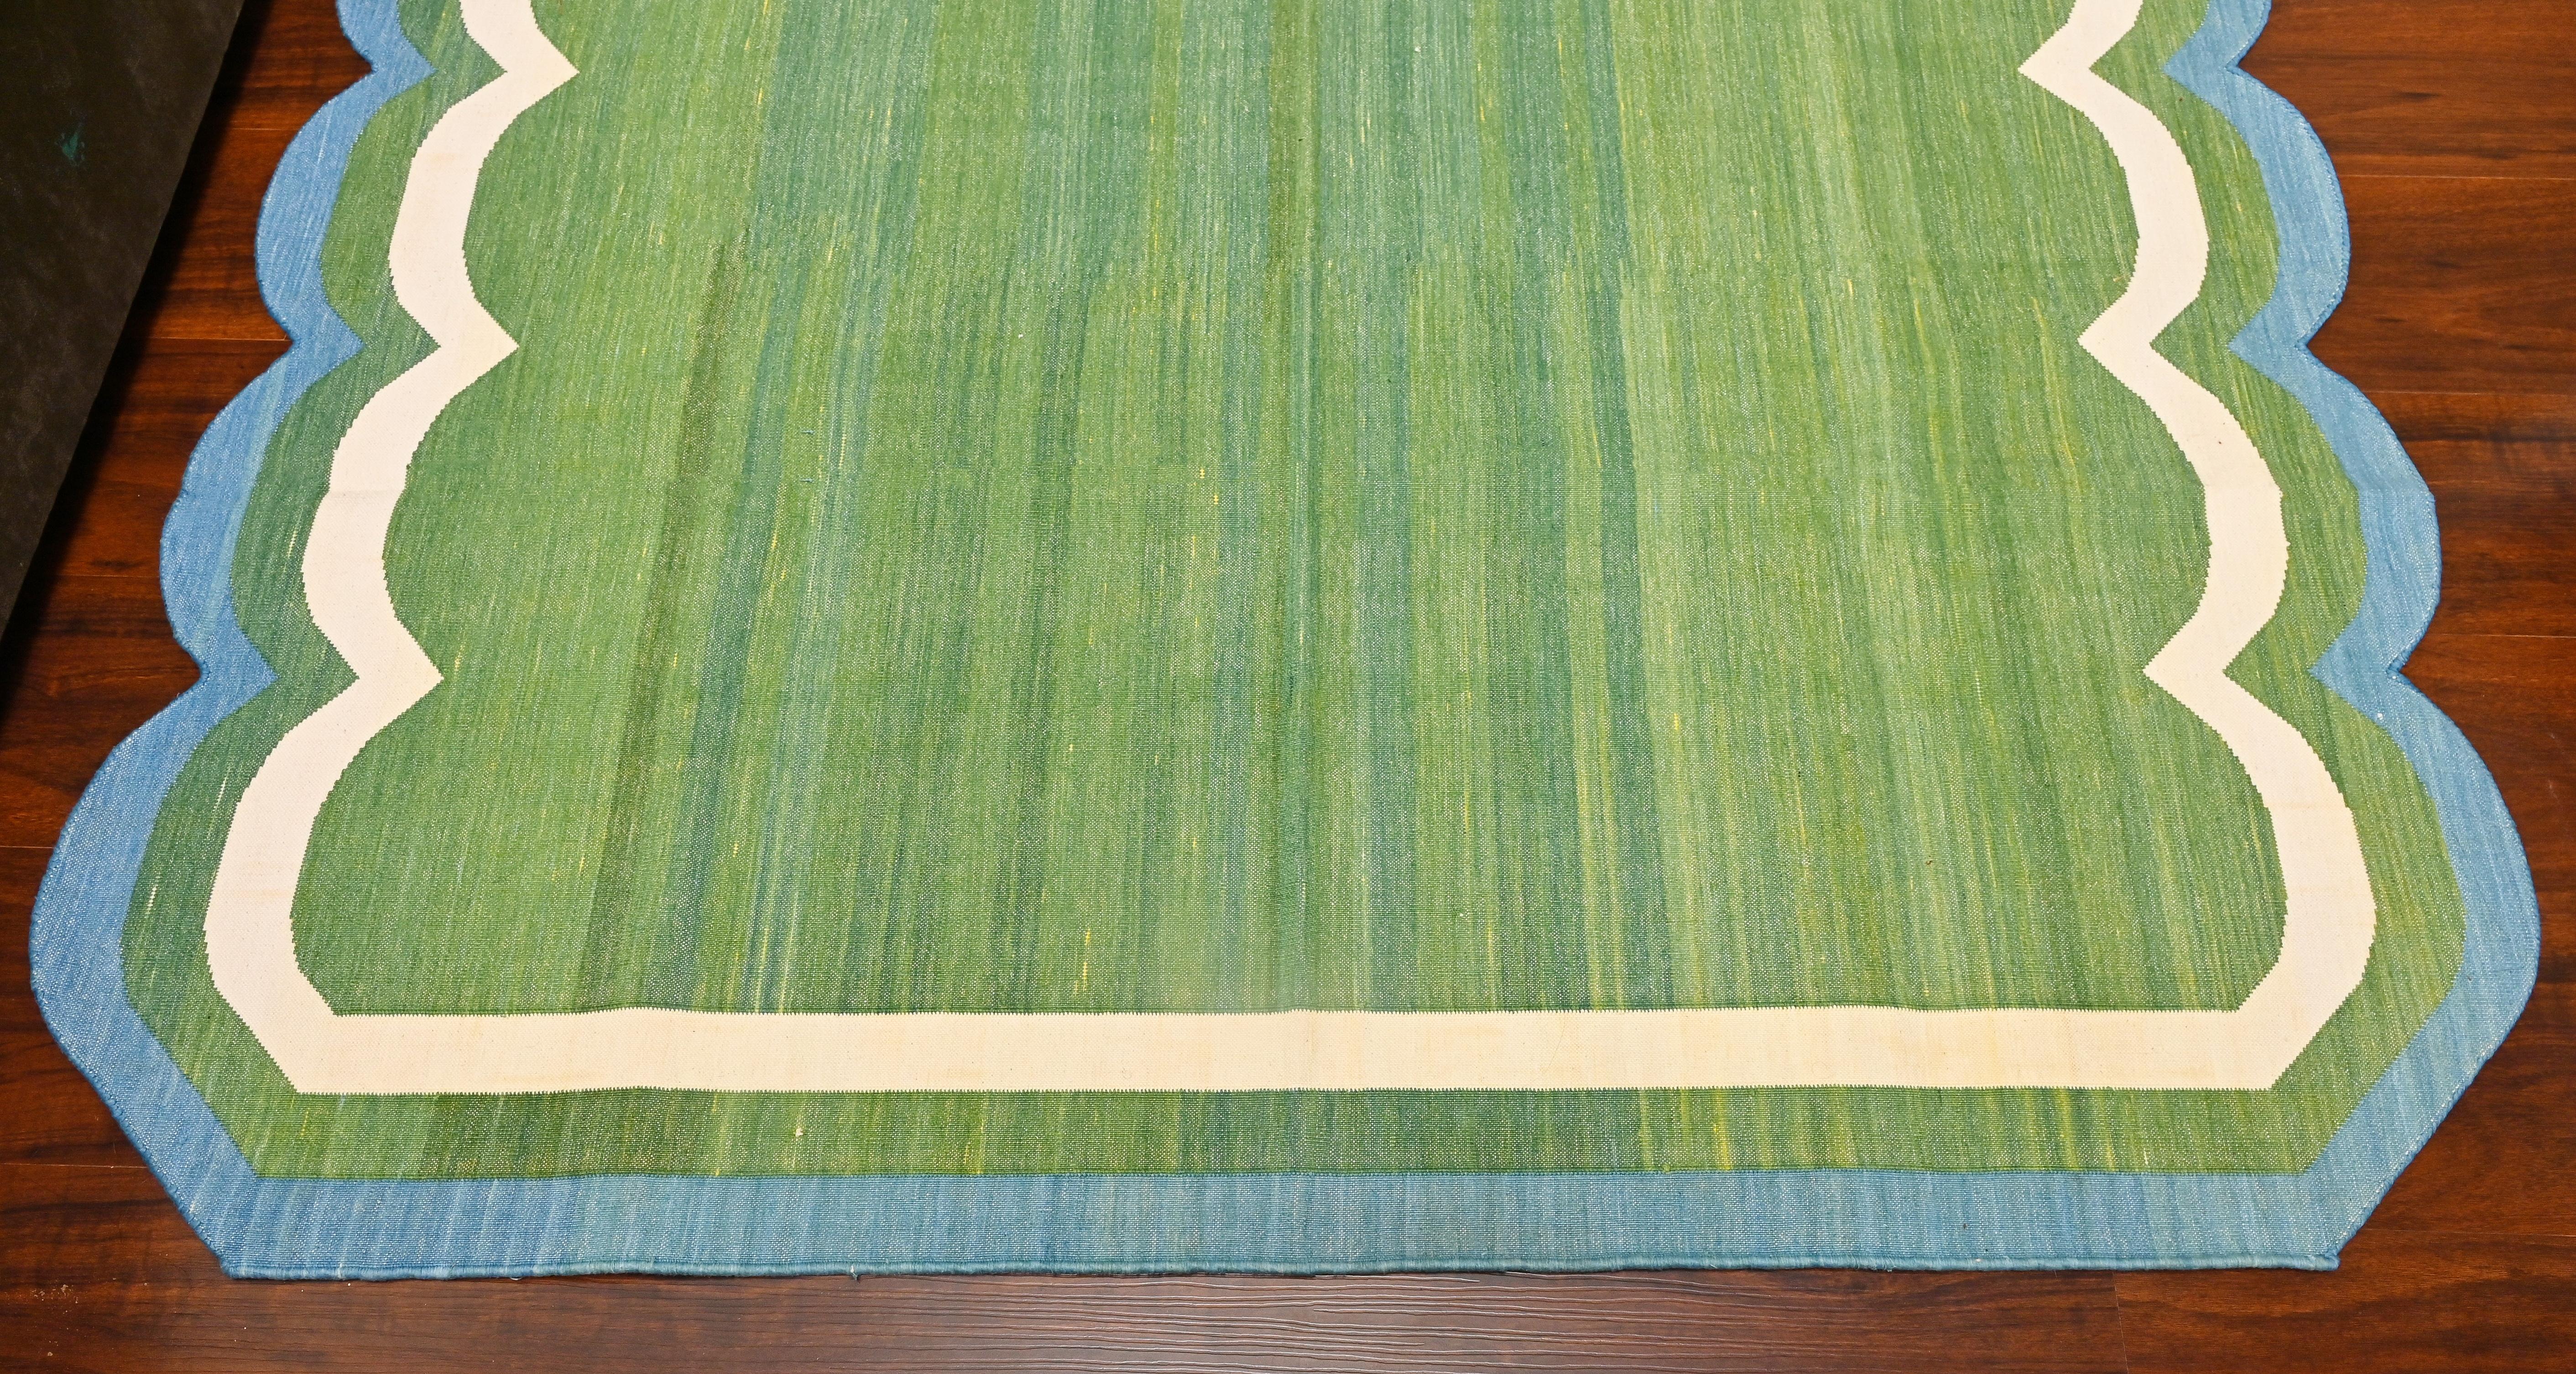 Handmade Cotton Area Flat Weave Rug, 5x7 Green And Blue Scalloped Kilim Dhurrie For Sale 2